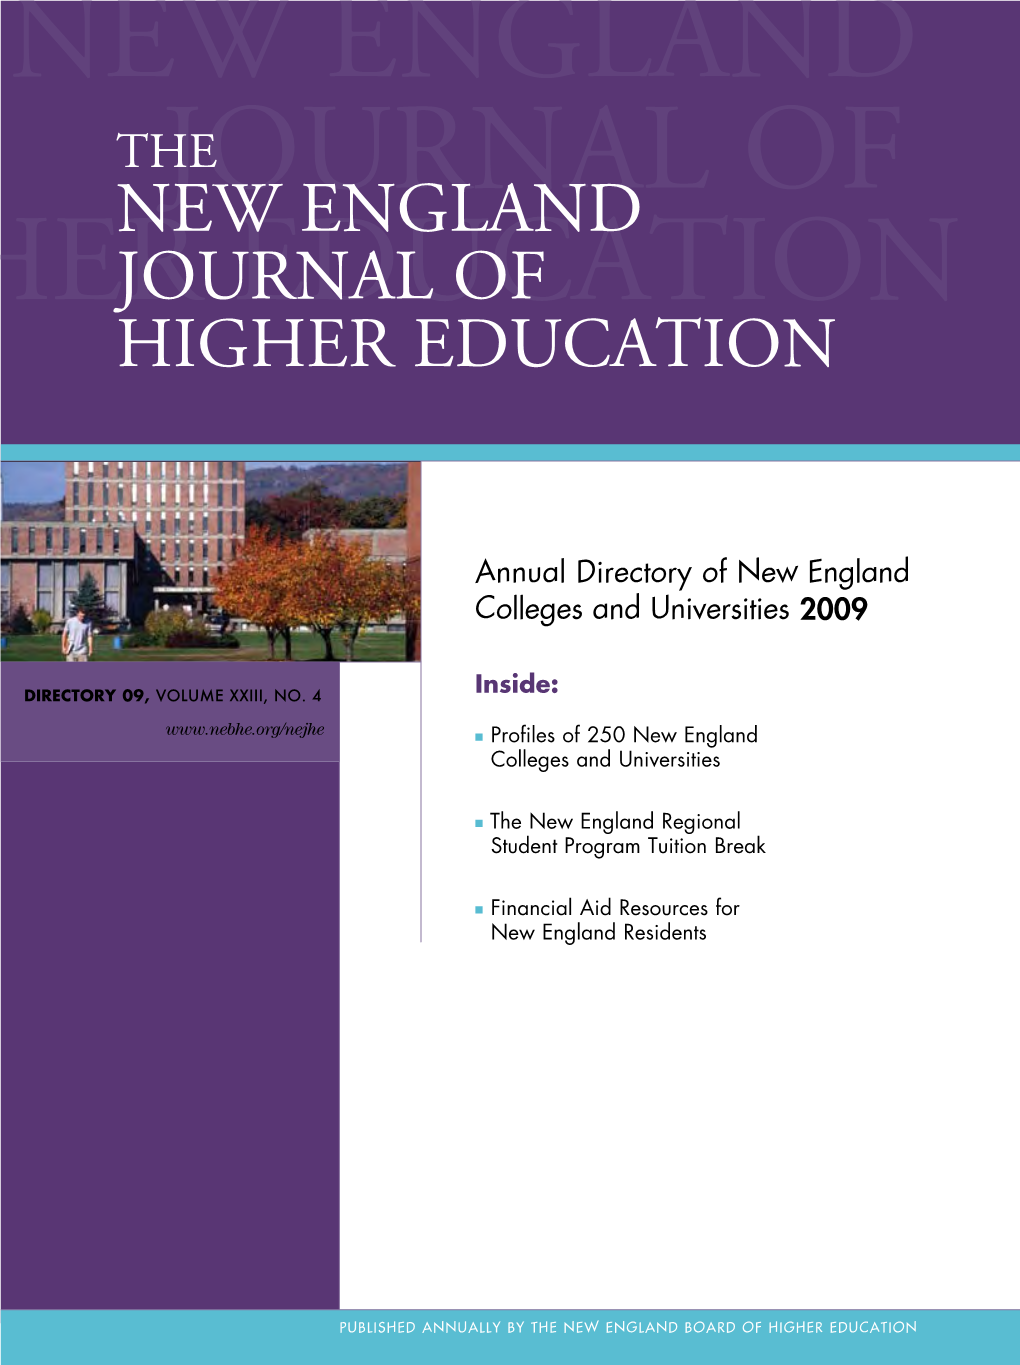 New England Journal of Higher Education